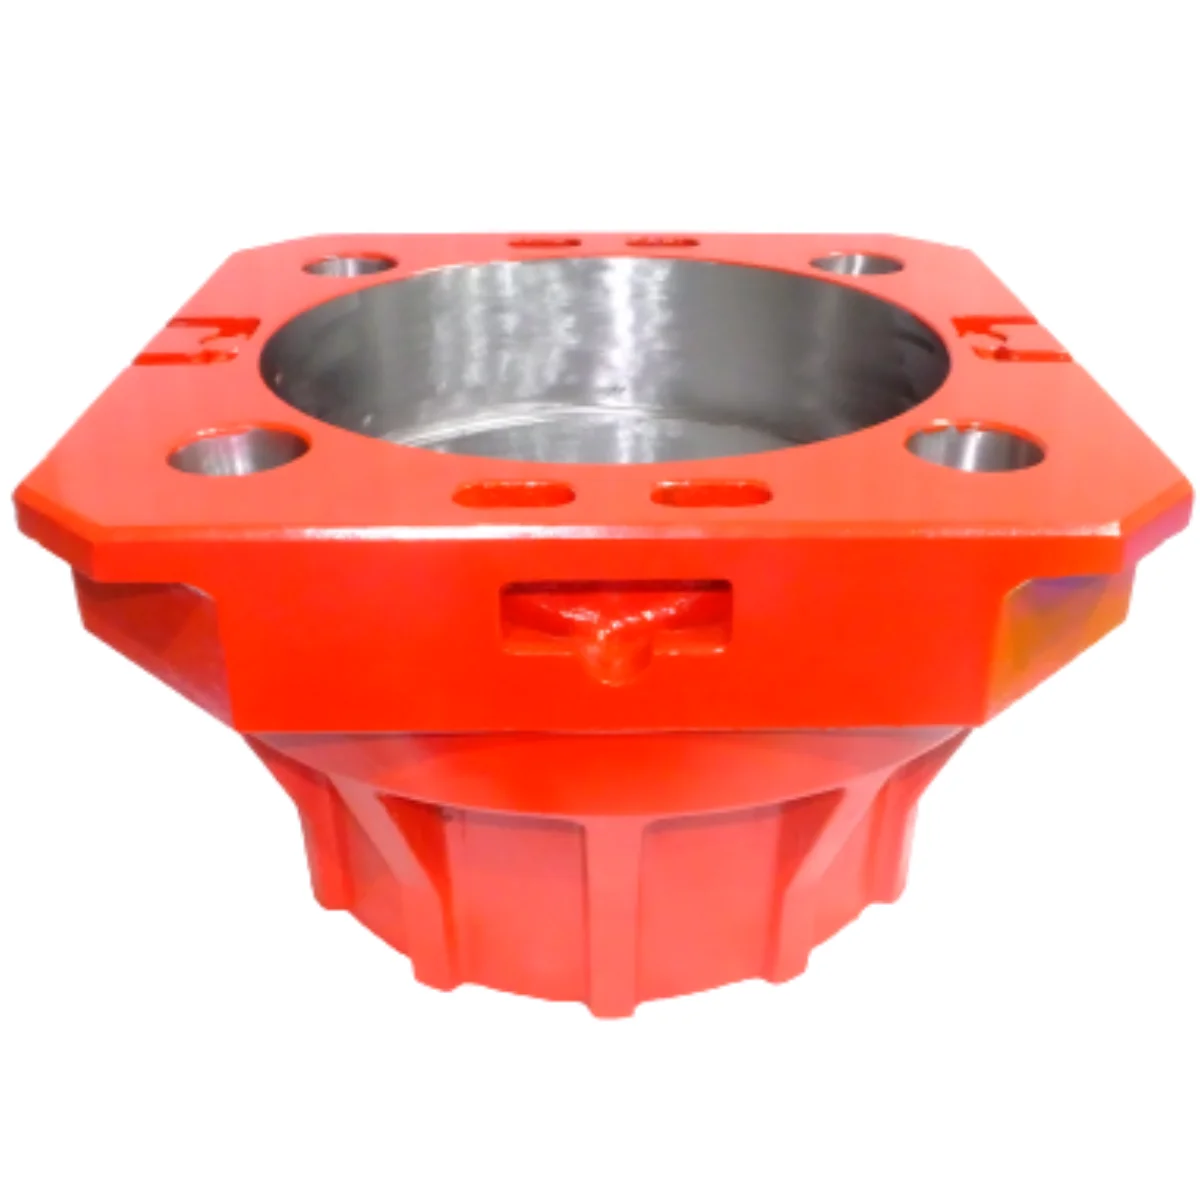 This MPCH master bushings for various rotary tables in the oilfield handling tools industry, Equivalent NOV, Wirth, DenCon, Varco, Oilwell, Emsco, HMH, National, Forum, and BVm. Master bushings are crucial components for drilling operations, facilitating the connection between the rotary table and the drill string. These bushings come in different sizes to fit specific rotary table diameters, such as 27.5 inches and 49.5 inches. They ensure smooth and efficient drilling processes by providing a stable platform for the rotation of the drill string.